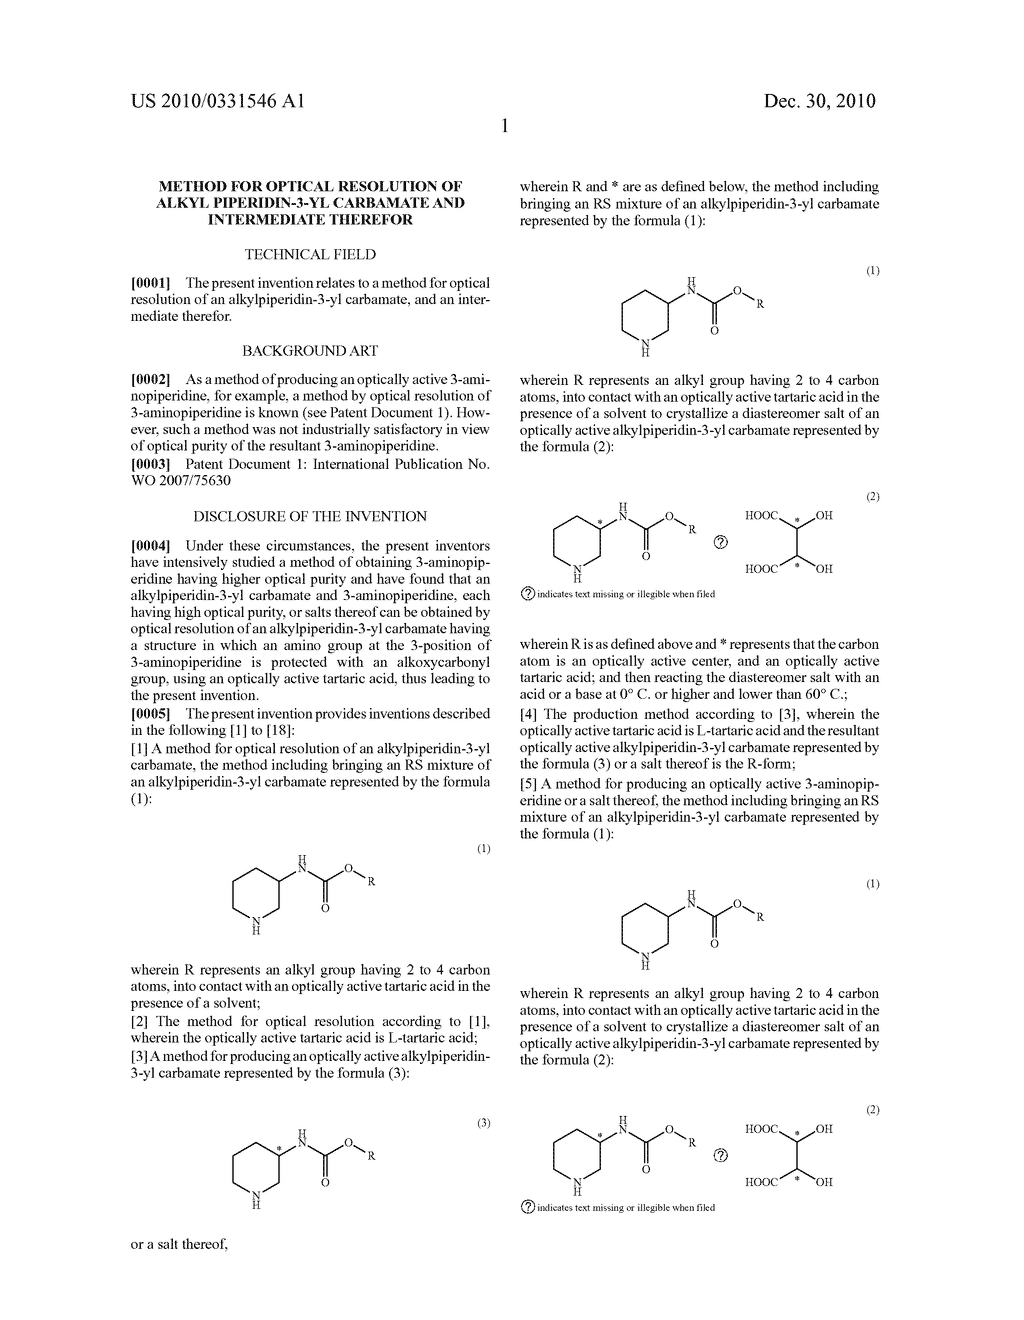 METHOD FOR OPTICAL RESOLUTION OF ALKYL PIPERIDIN-3-YL CARBAMATE AND INTERMEDIATE THEREFOR - diagram, schematic, and image 02